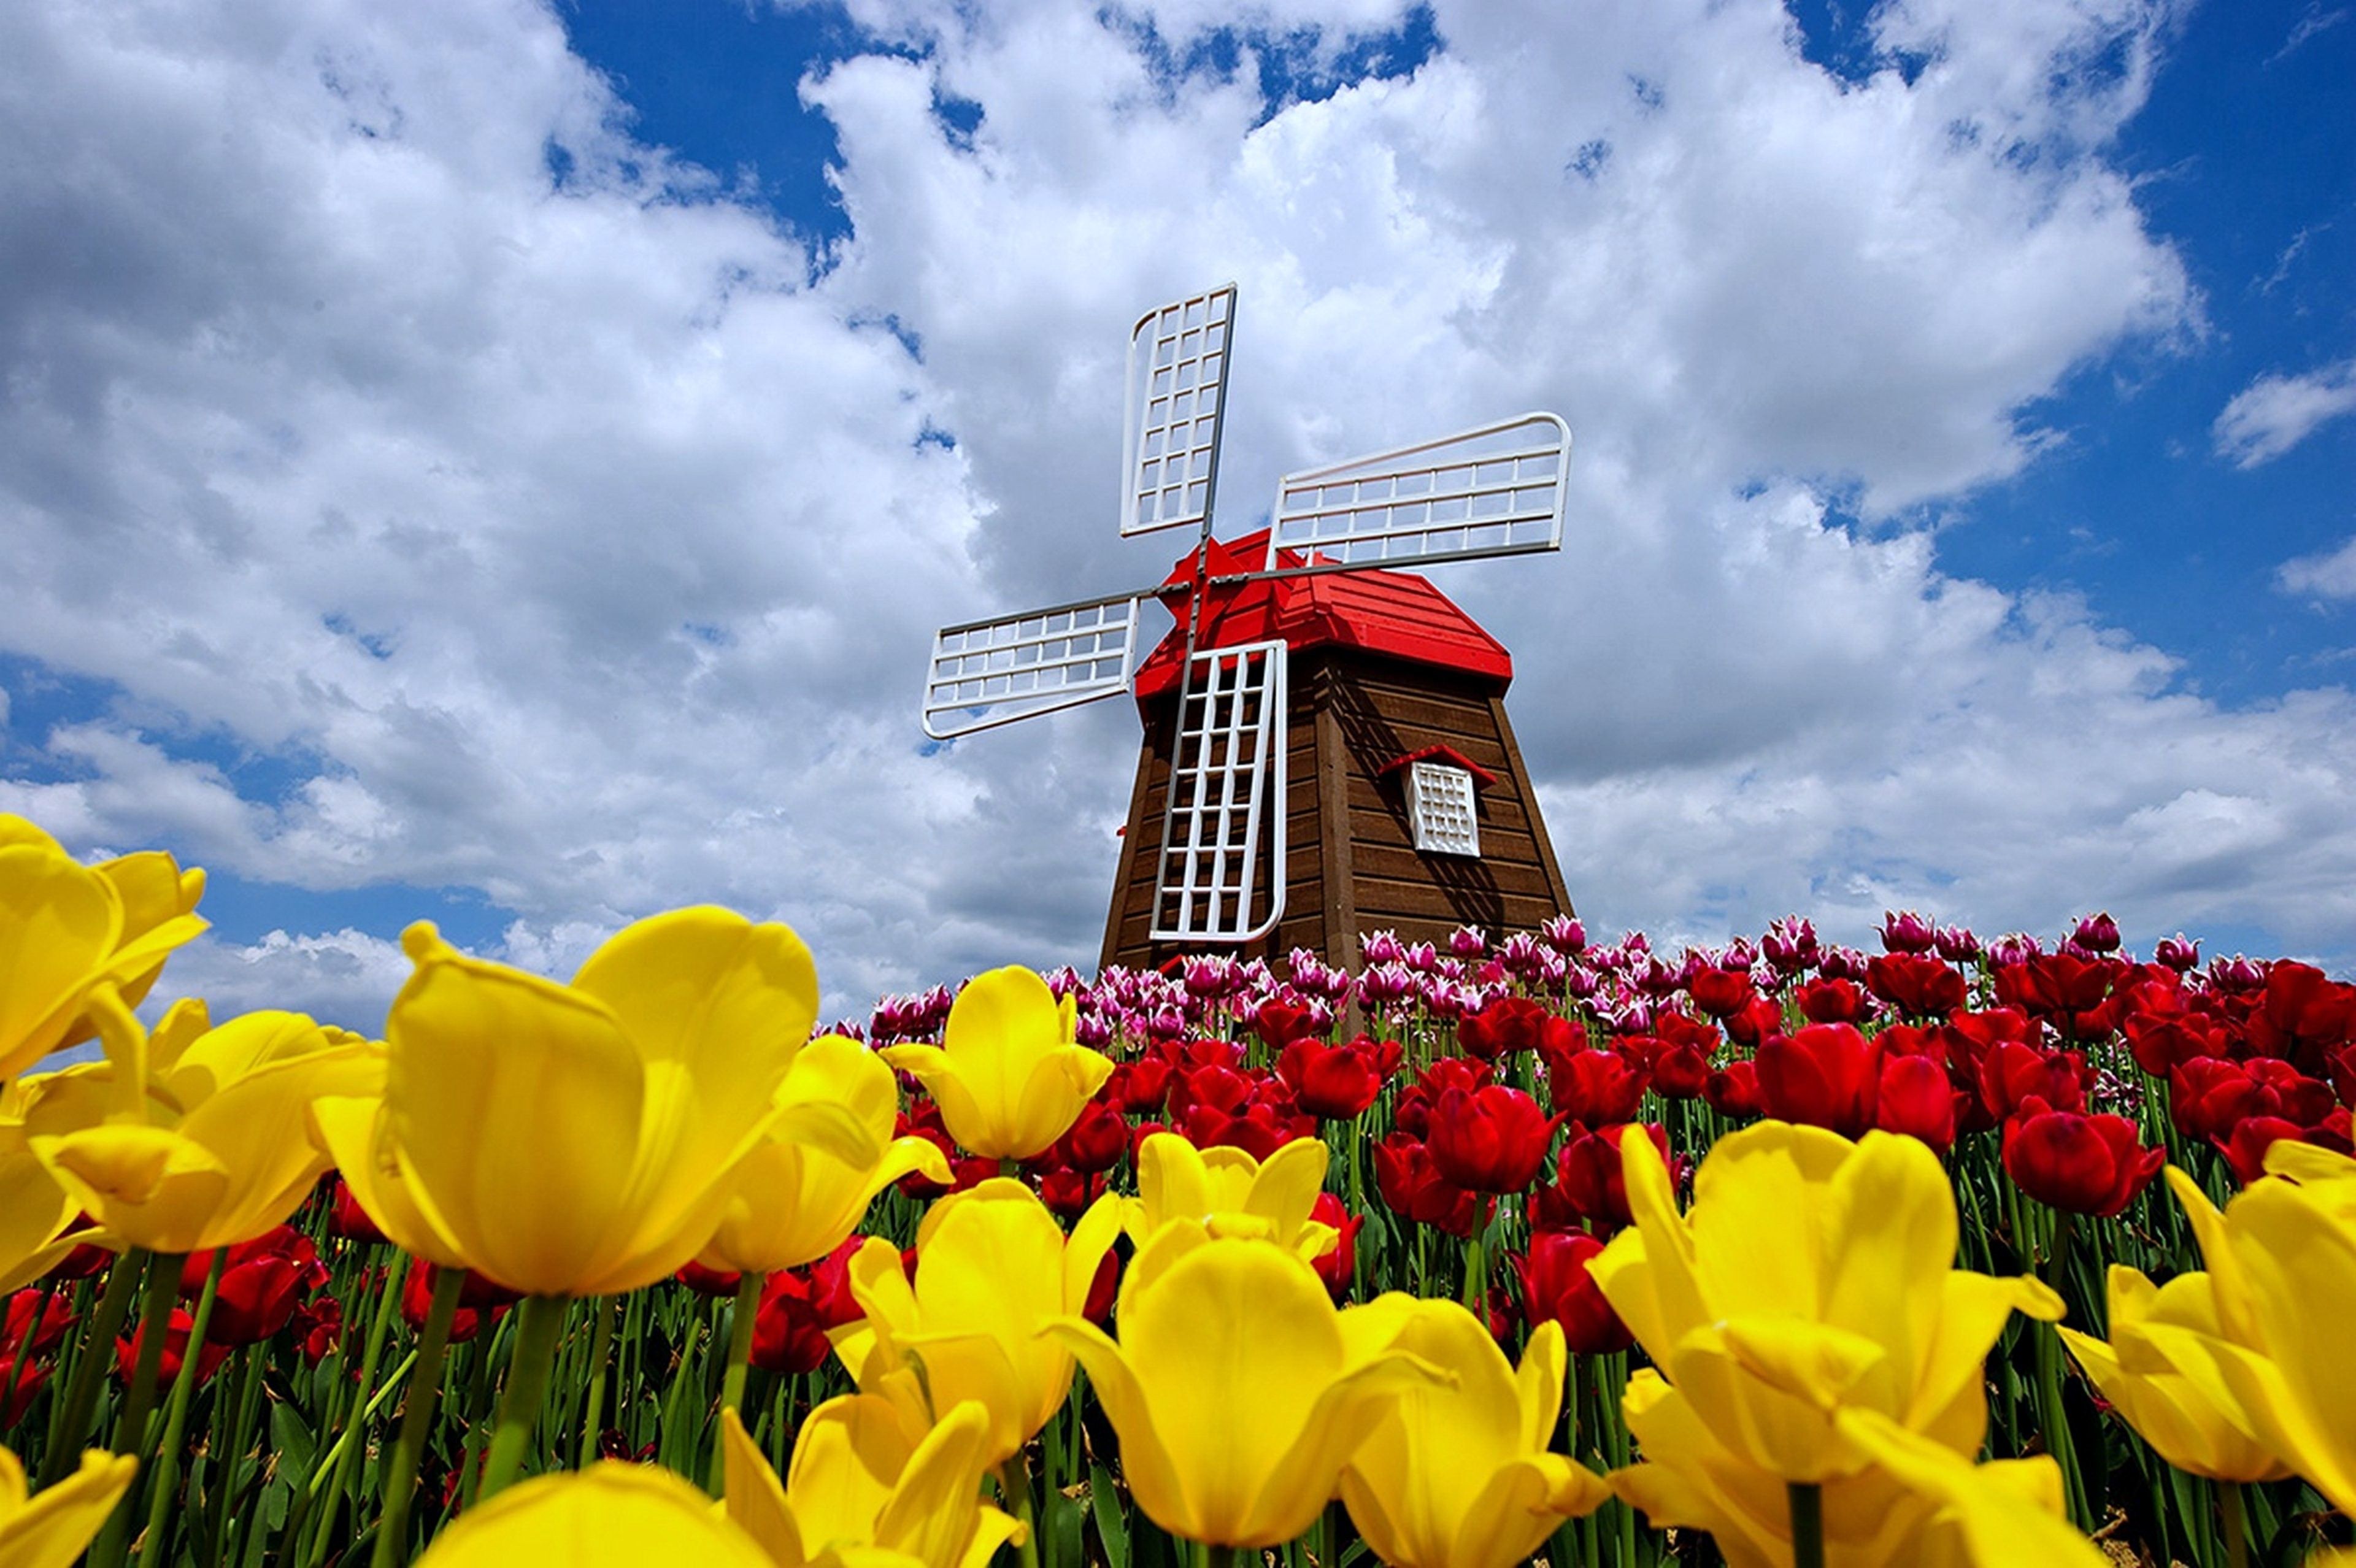 Free download Nature Windmill Sky Clouds Spring Flowers Tulips